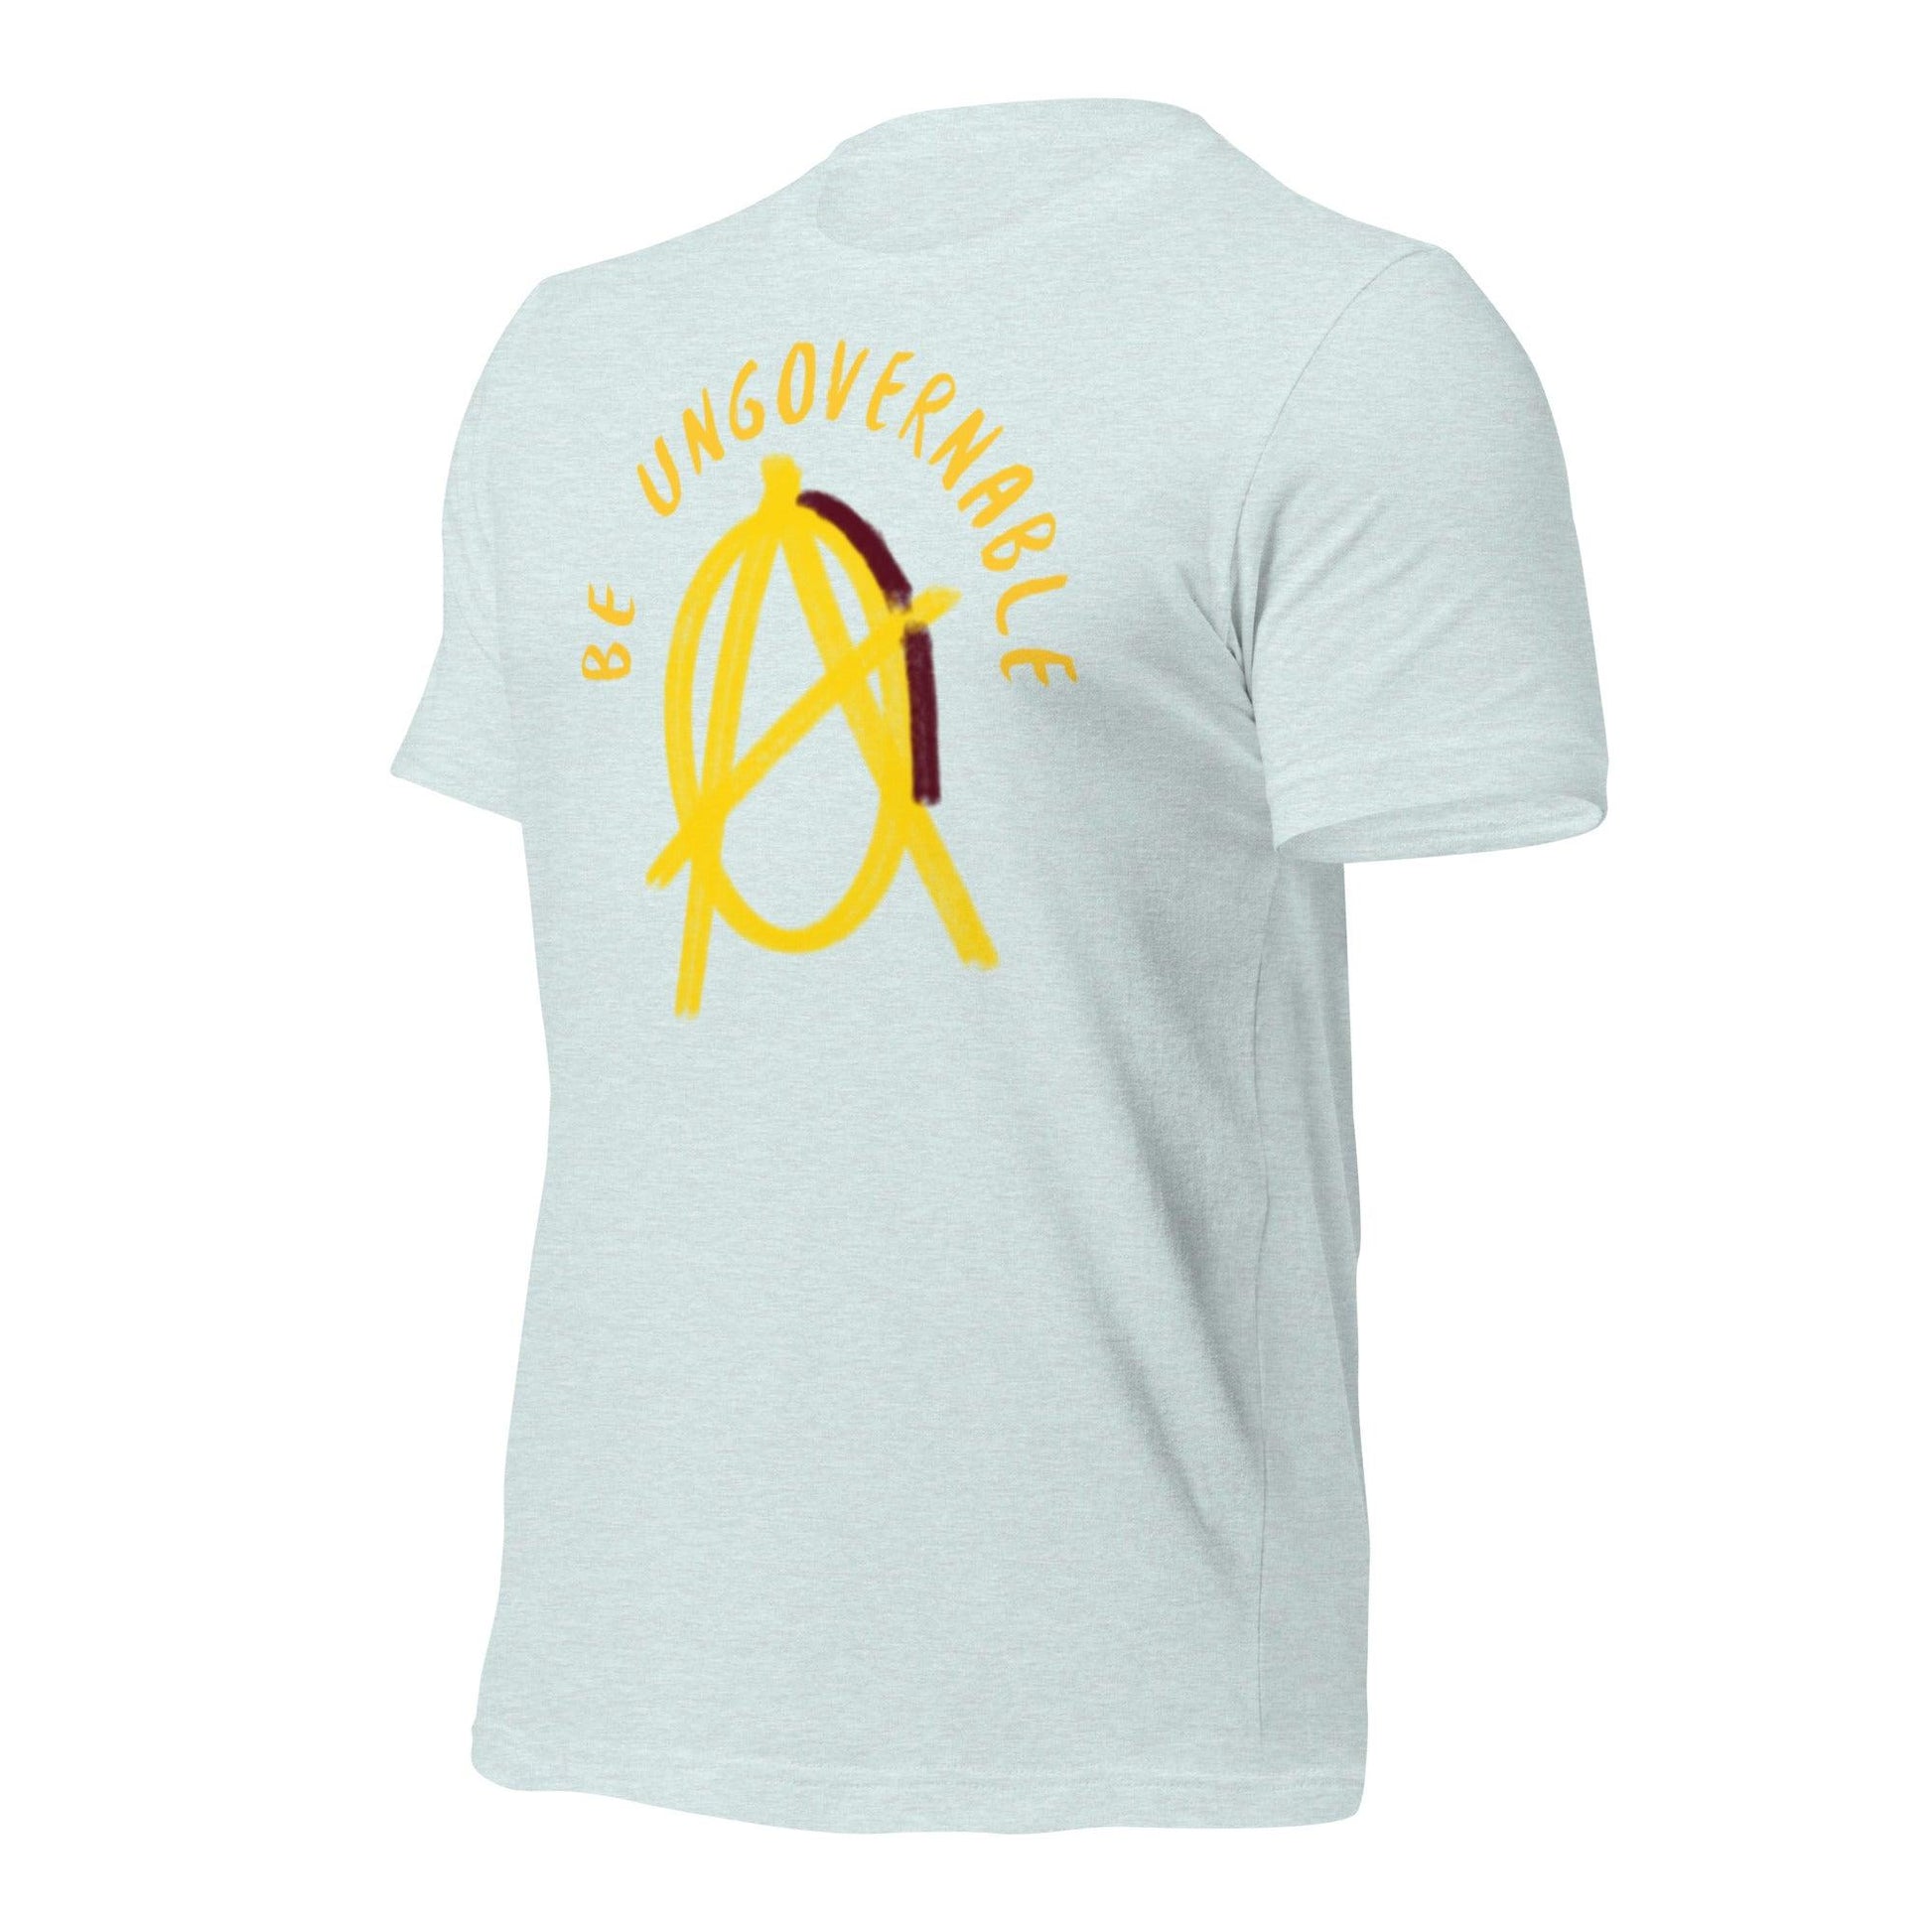 Anarchy Wear "Be Ungovernable" Gold Pastels Unisex t-shirt - AnarchyWear